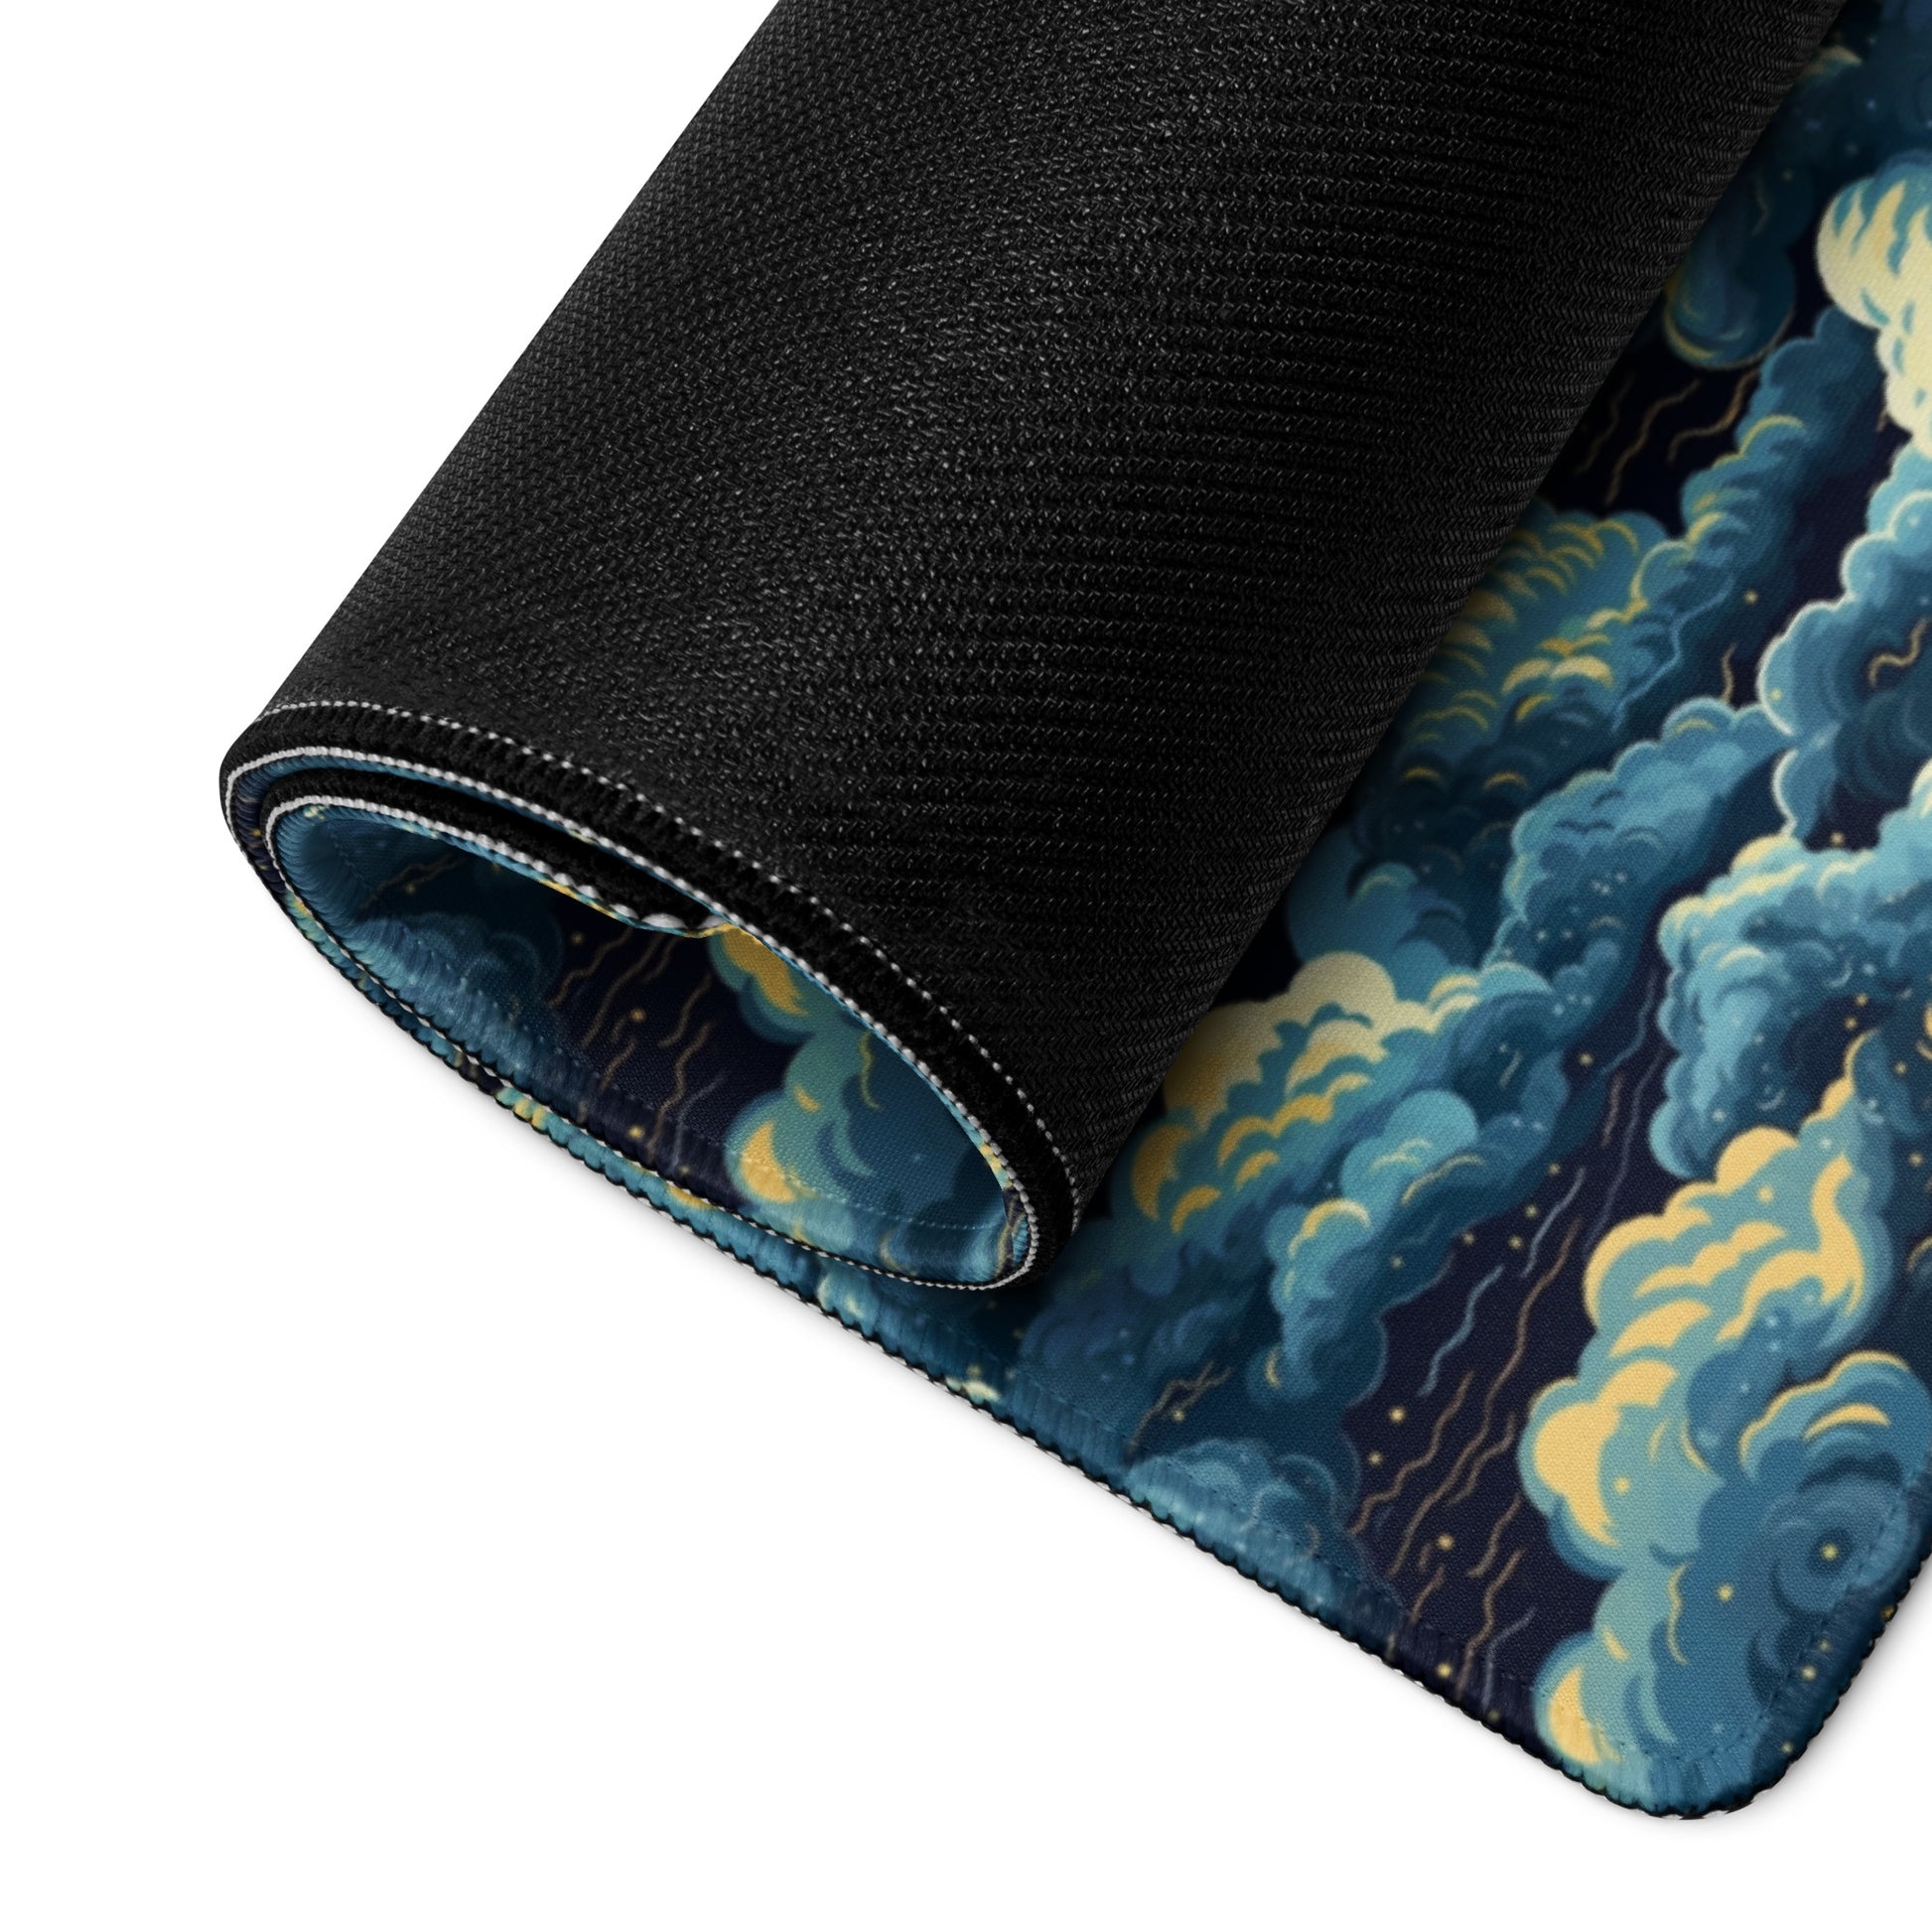 A 36" x 18" desk pad with a cloudy night sky pattern rolled up.